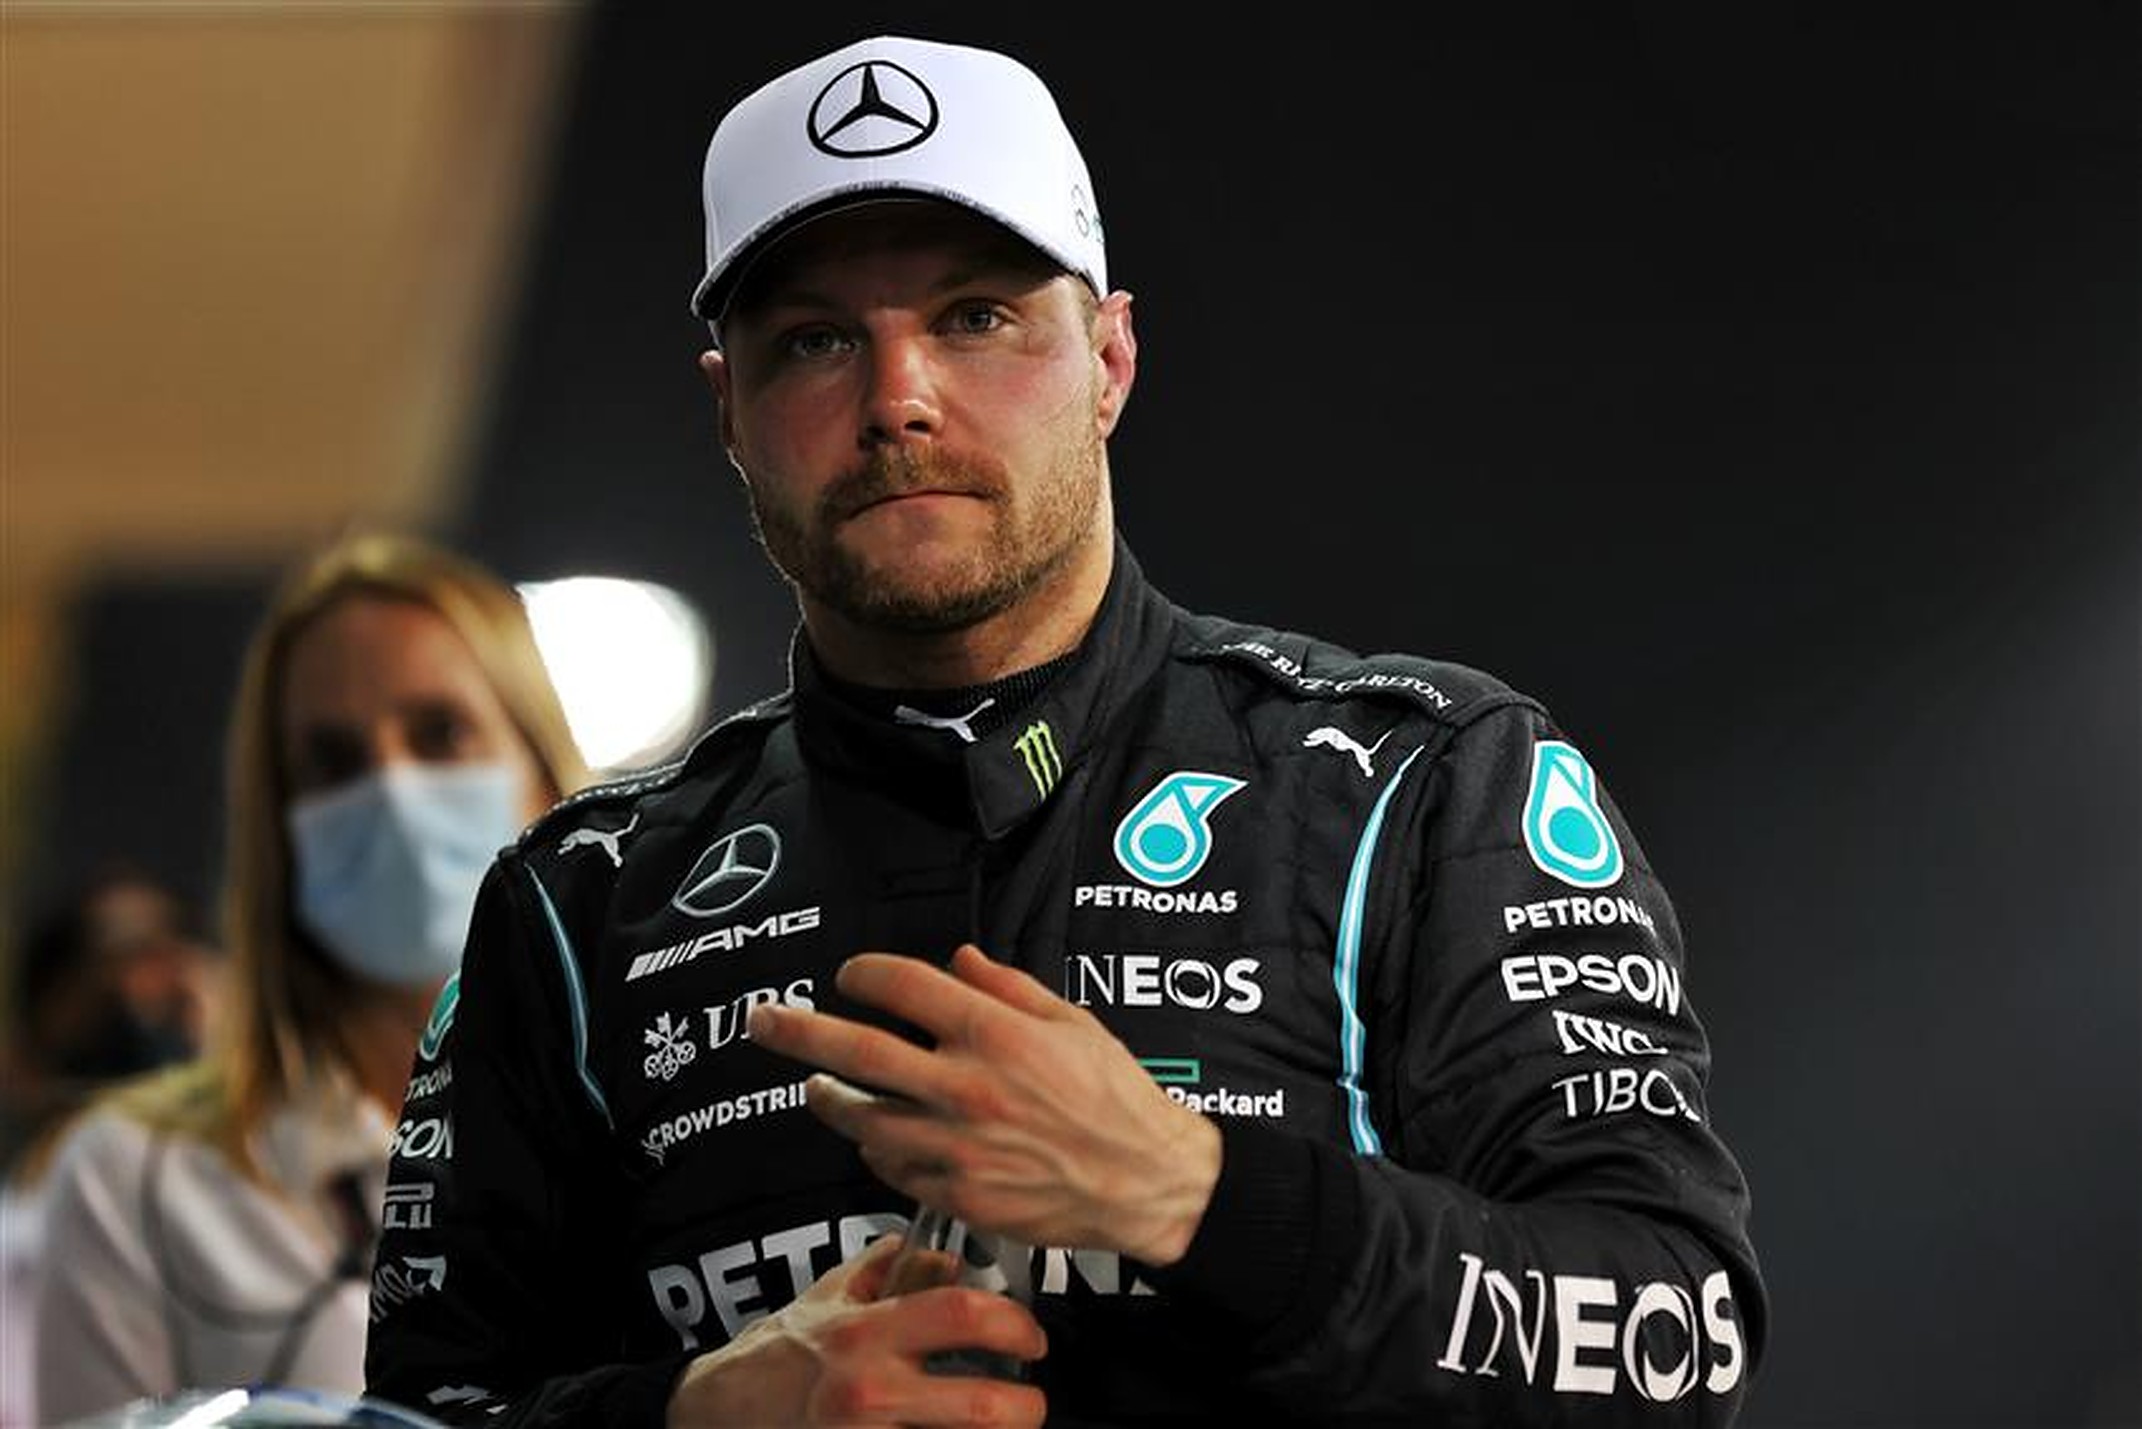 Bottas should consider going back to Williams - Button